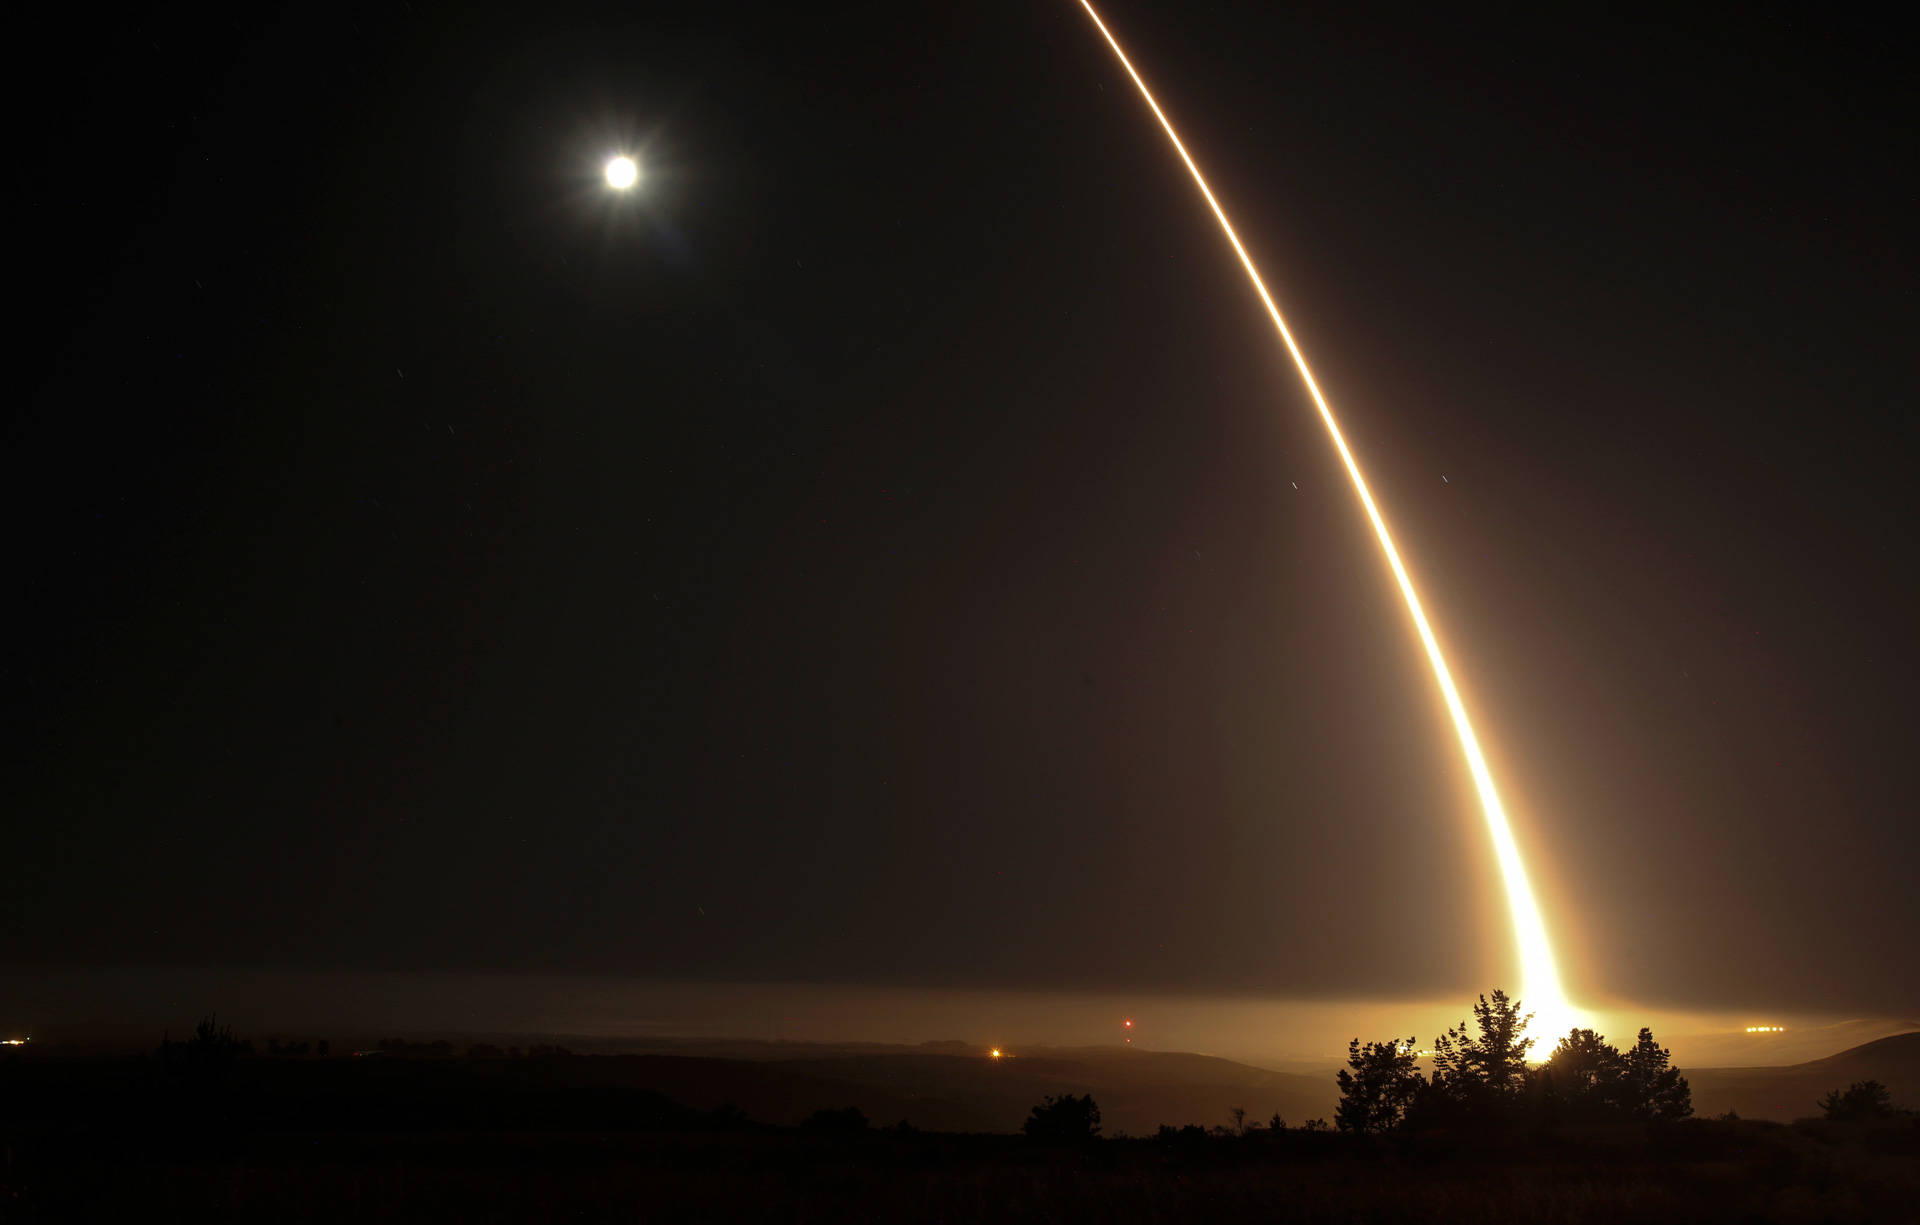 A streak of light trails off into the night sky during a test firing of an unarmed ICBM at Vandenberg Air Force Base early on May 3, 2017. The upcoming test will be the fourth such test this year. RINGO CHIU/AFP/Getty Images